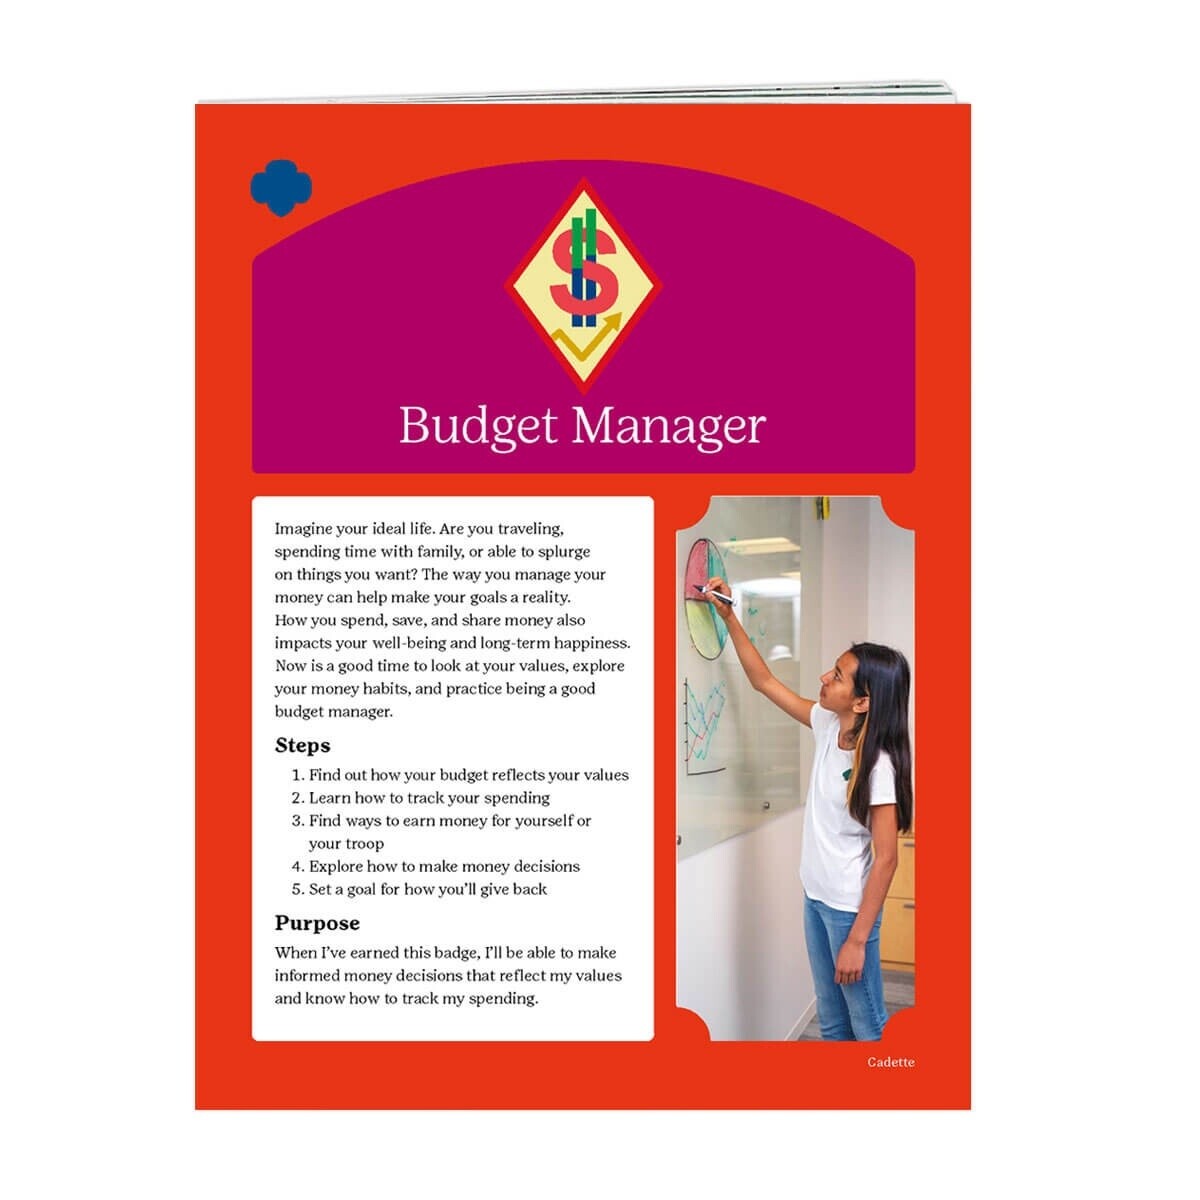 Cadette Budget Manager Badge Requirements